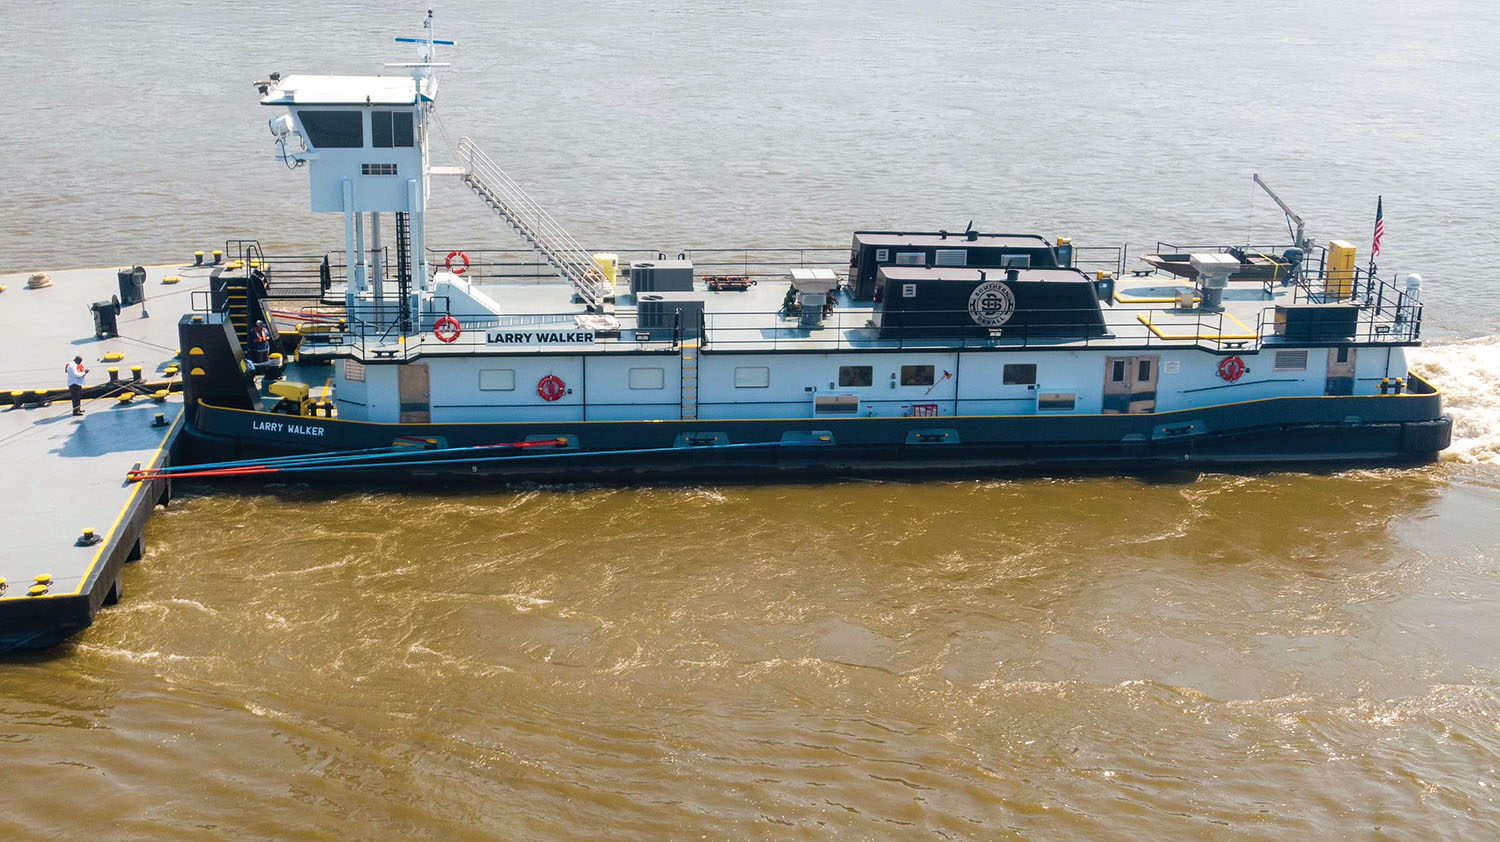 Built by Nichols Boat Company, the mv. Larry Walker was designed by Farrell & Norton Naval Architects. (Photo\ courtesy of Southern Devall Towing)